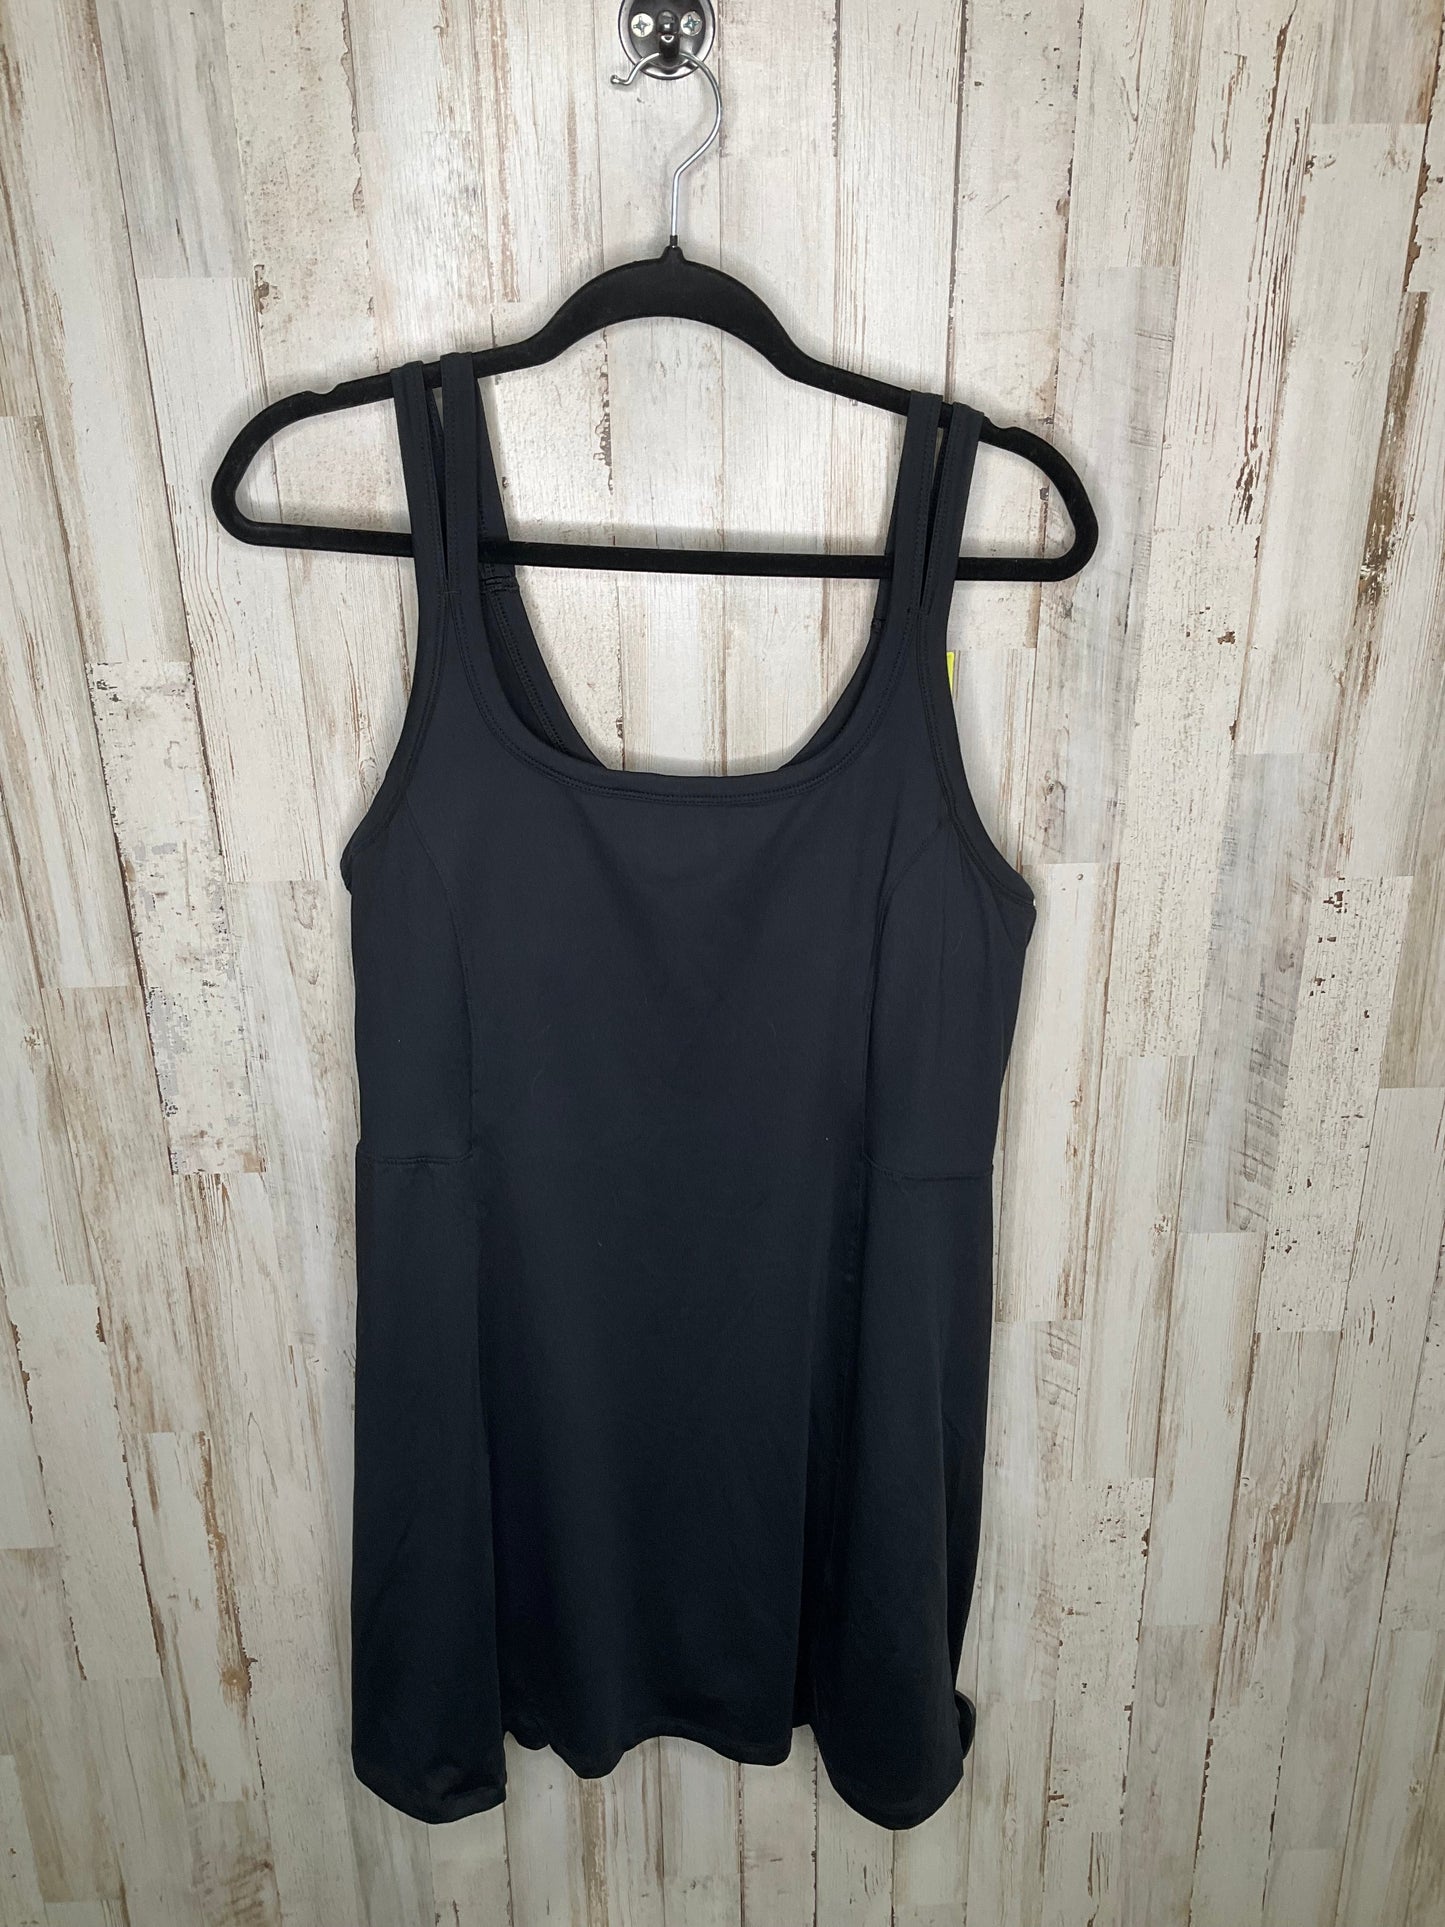 Black Athletic Dress All In Motion, Size 2x